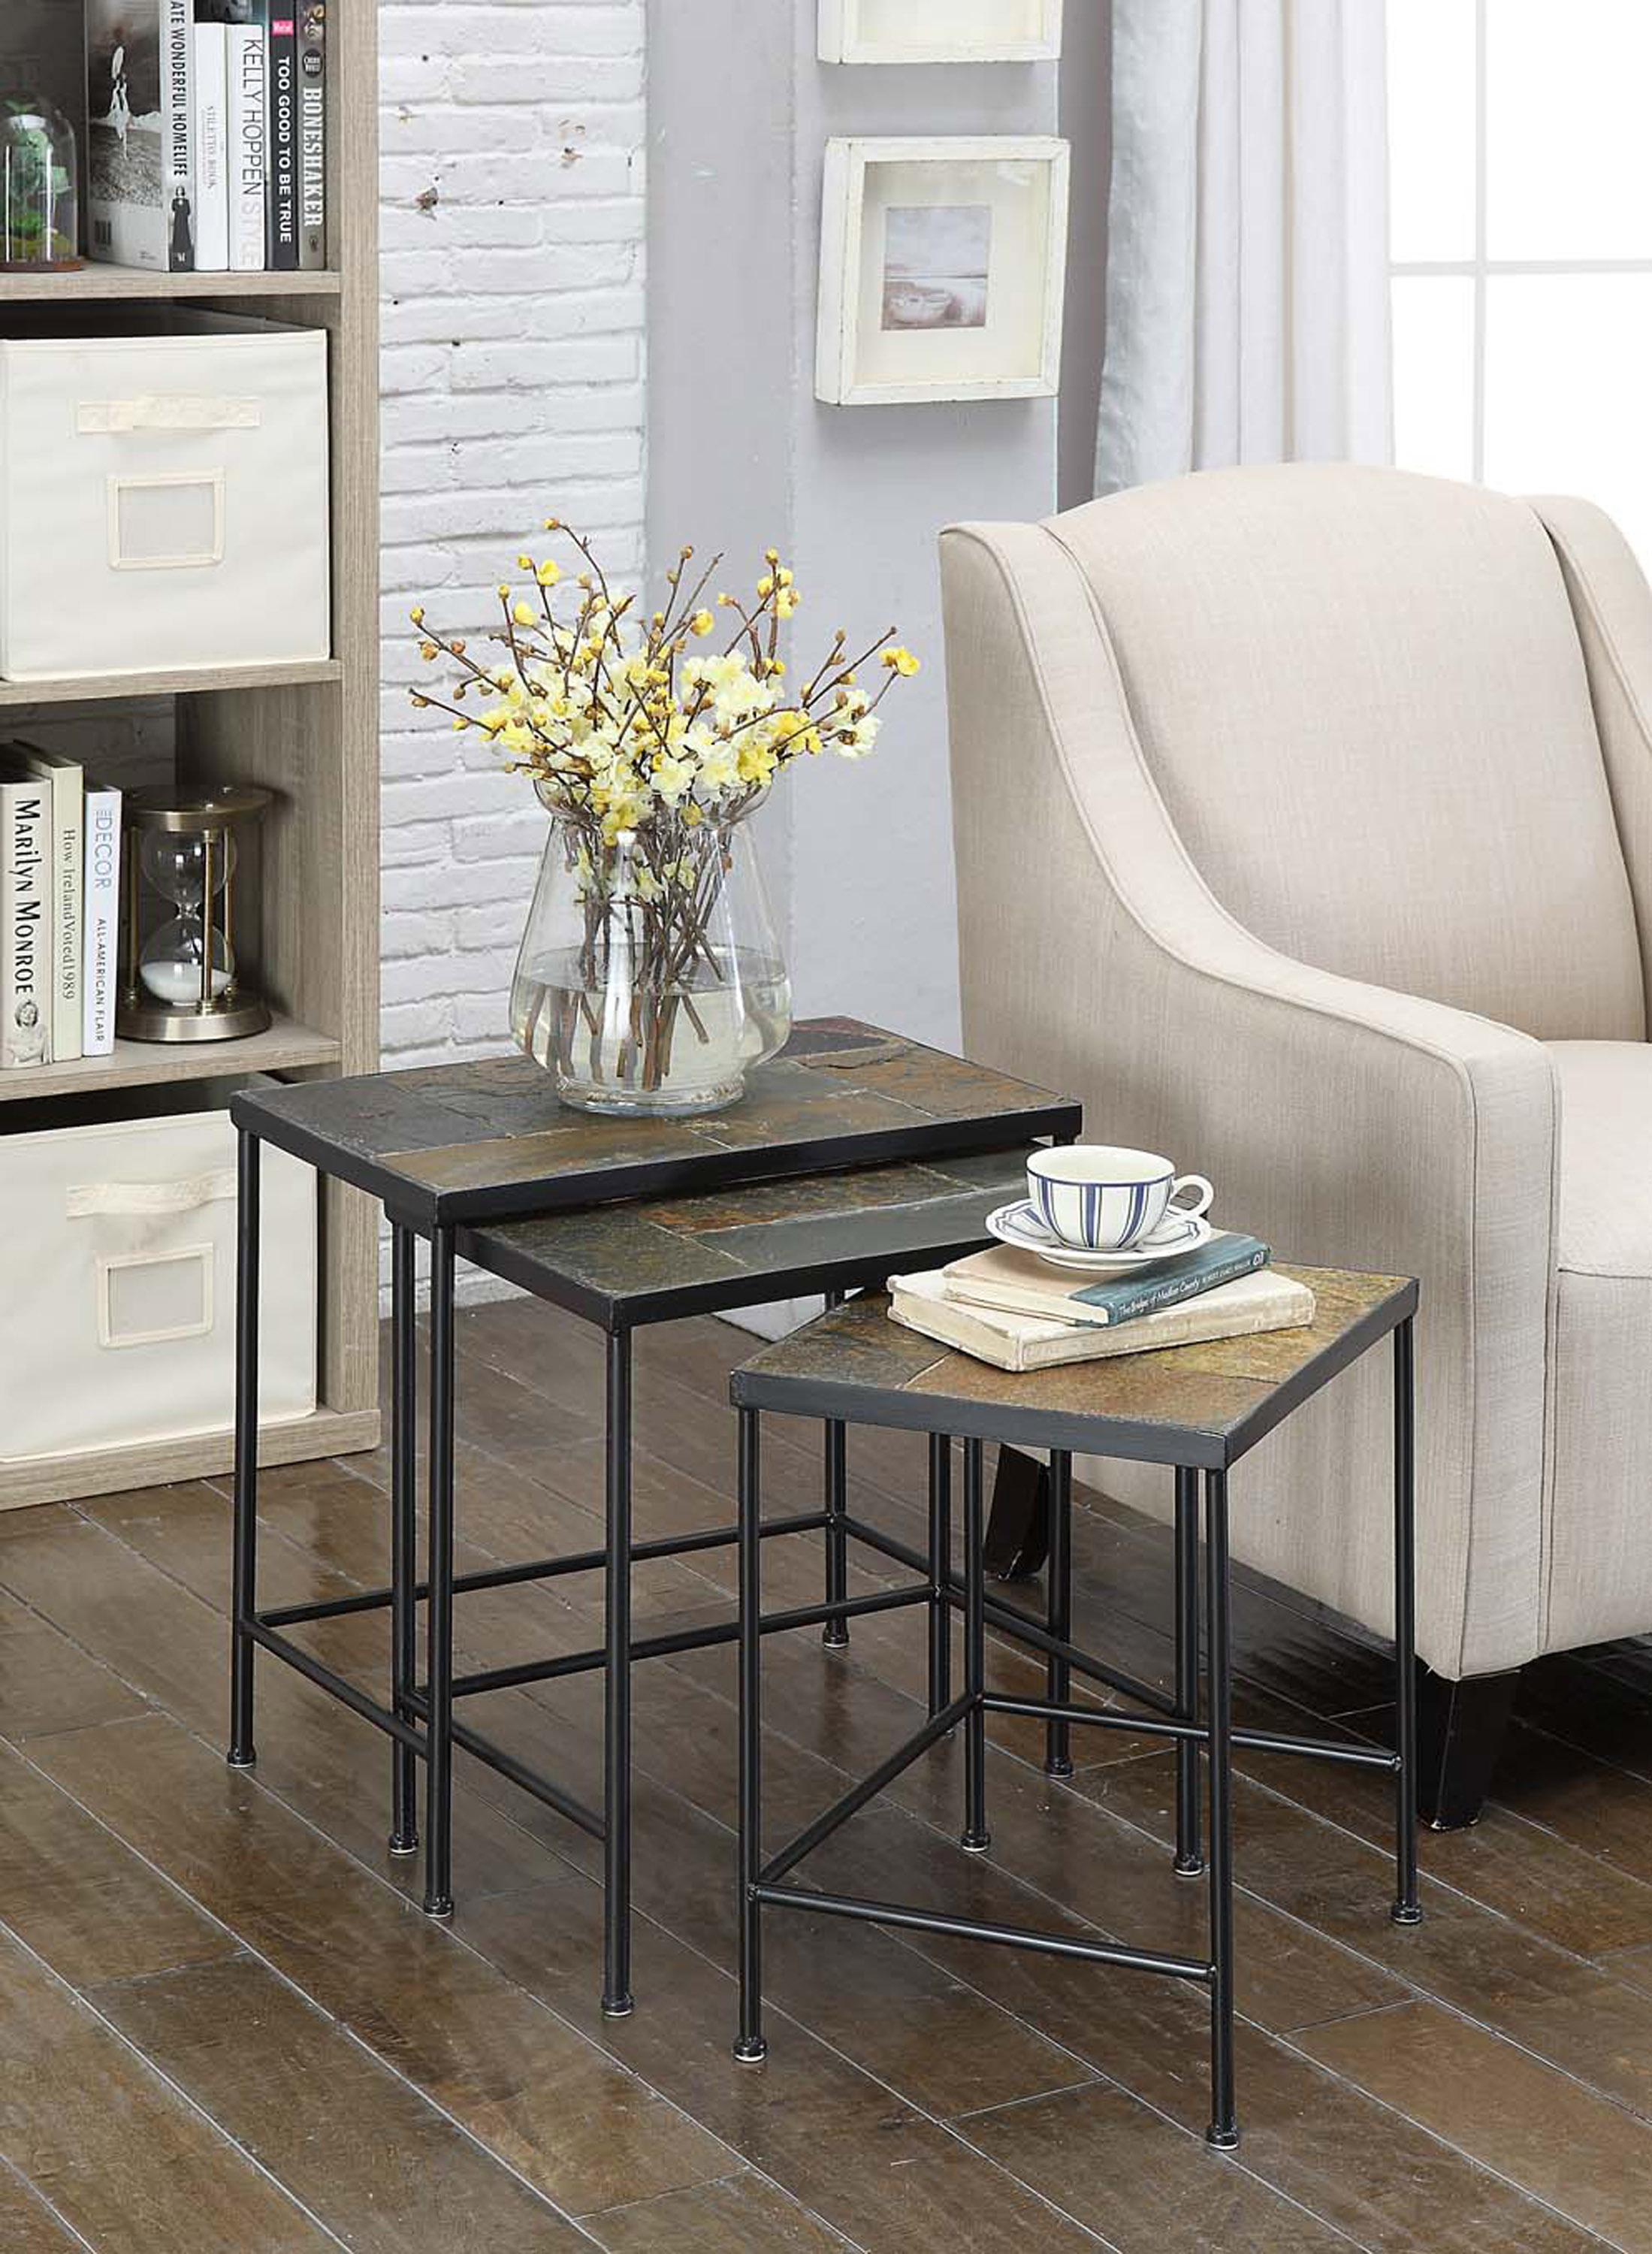 Picture of 4D Concepts 601609 3 piece Nesting Tables with Slate Tops - Metal/Slate